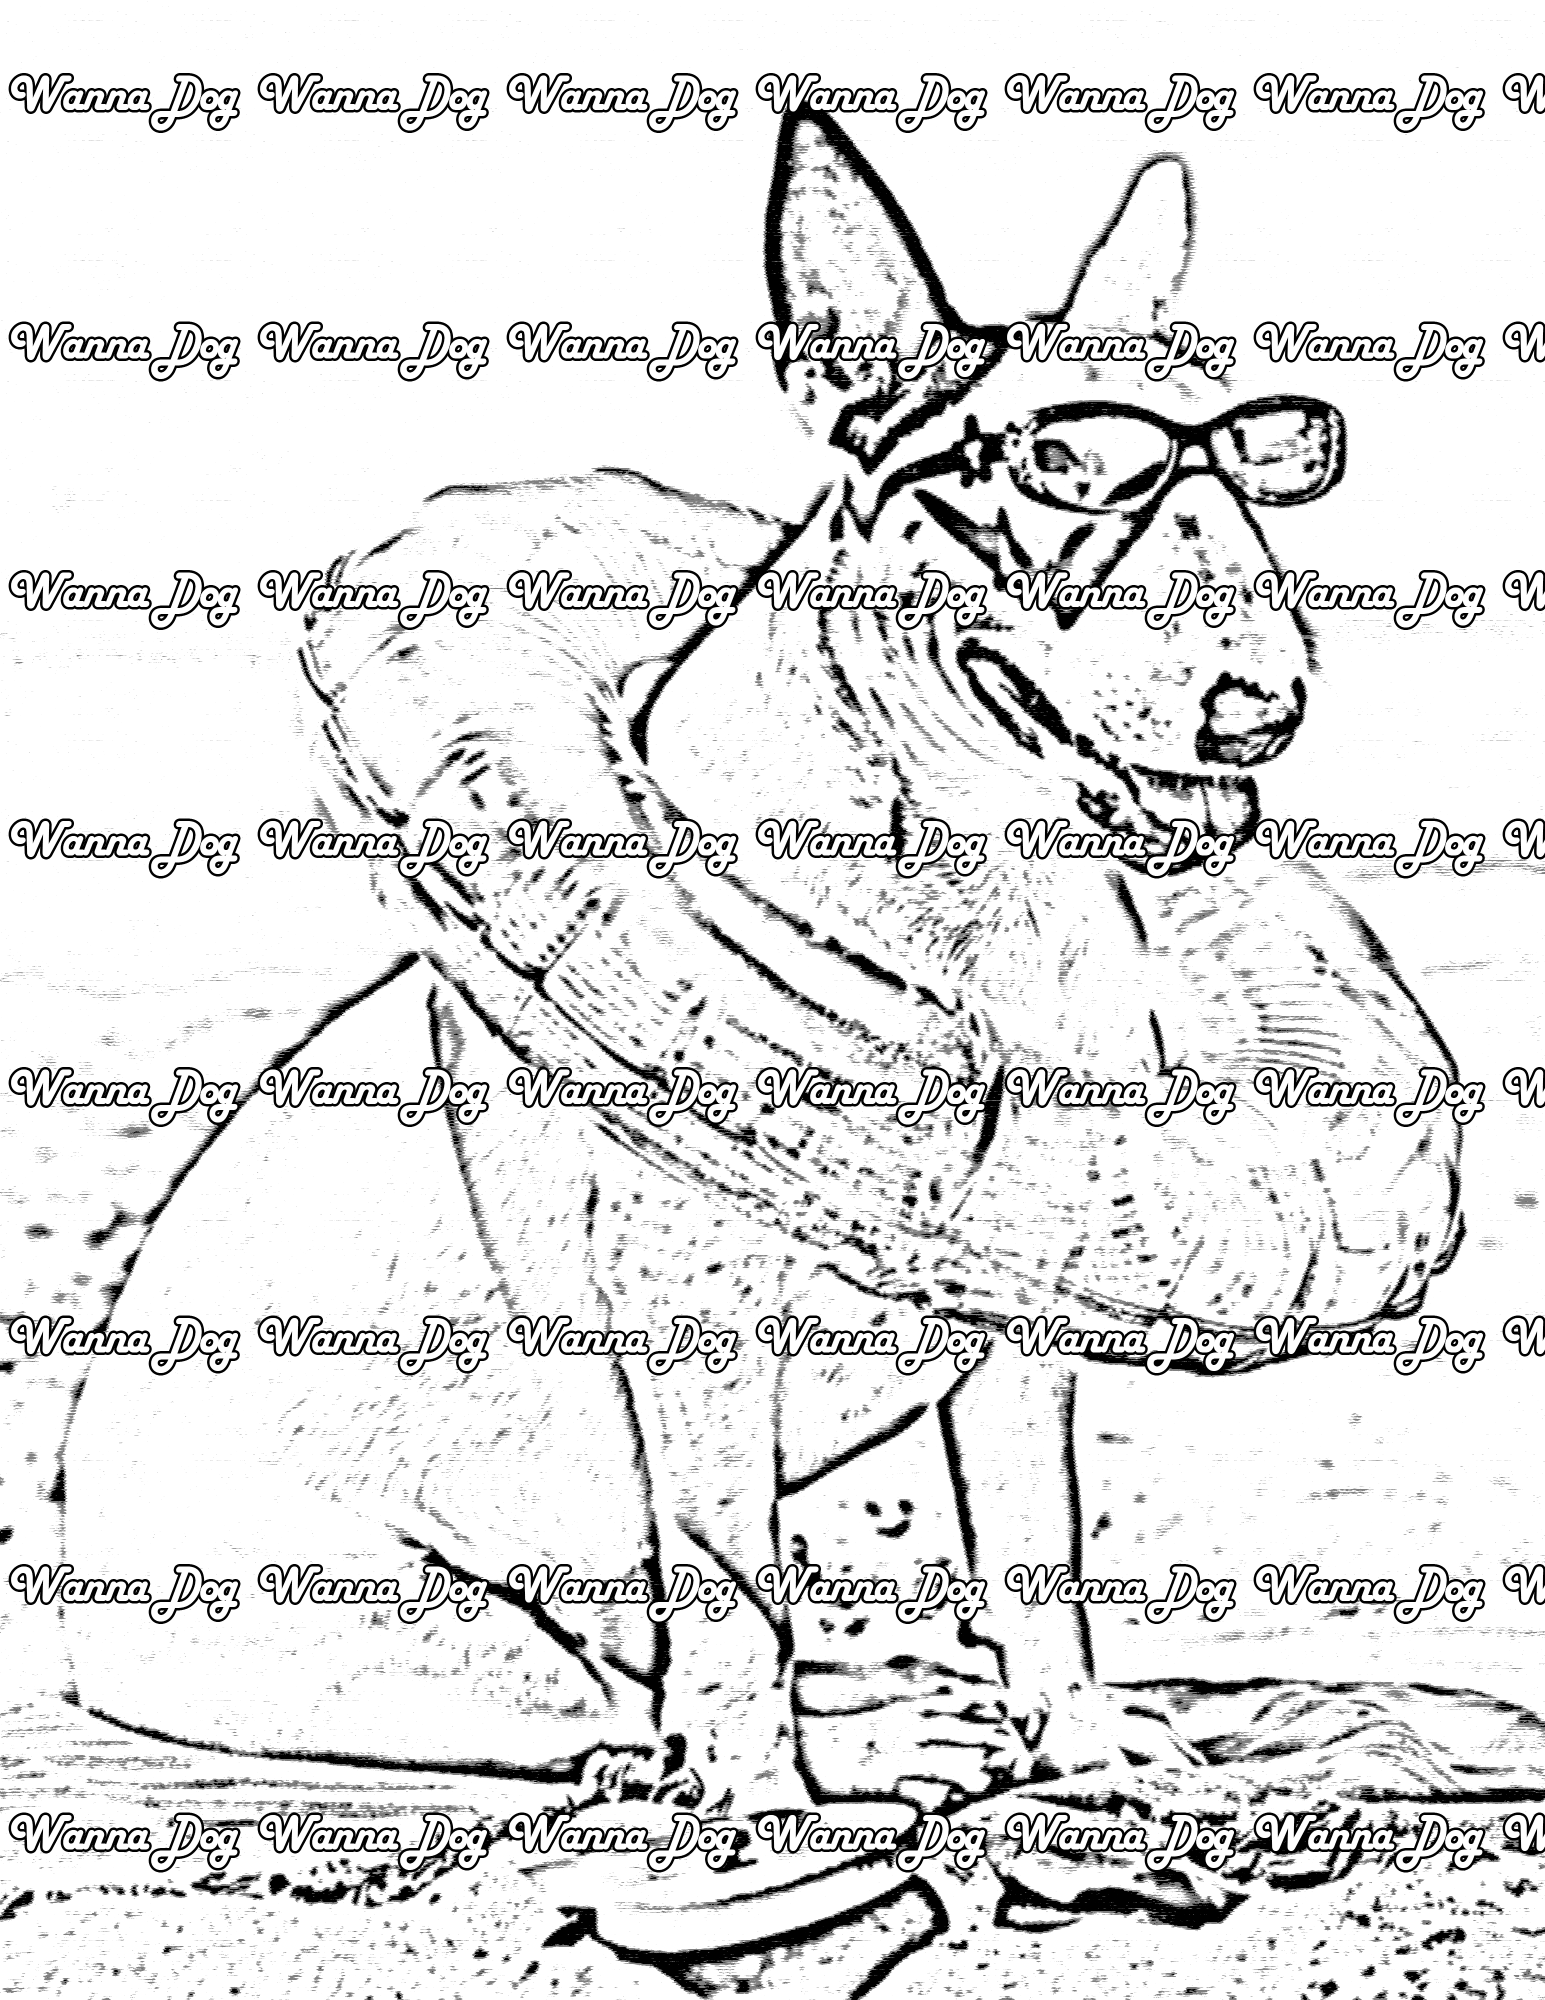 Bull Terrier Coloring Page of a Bull Terrier at the beach